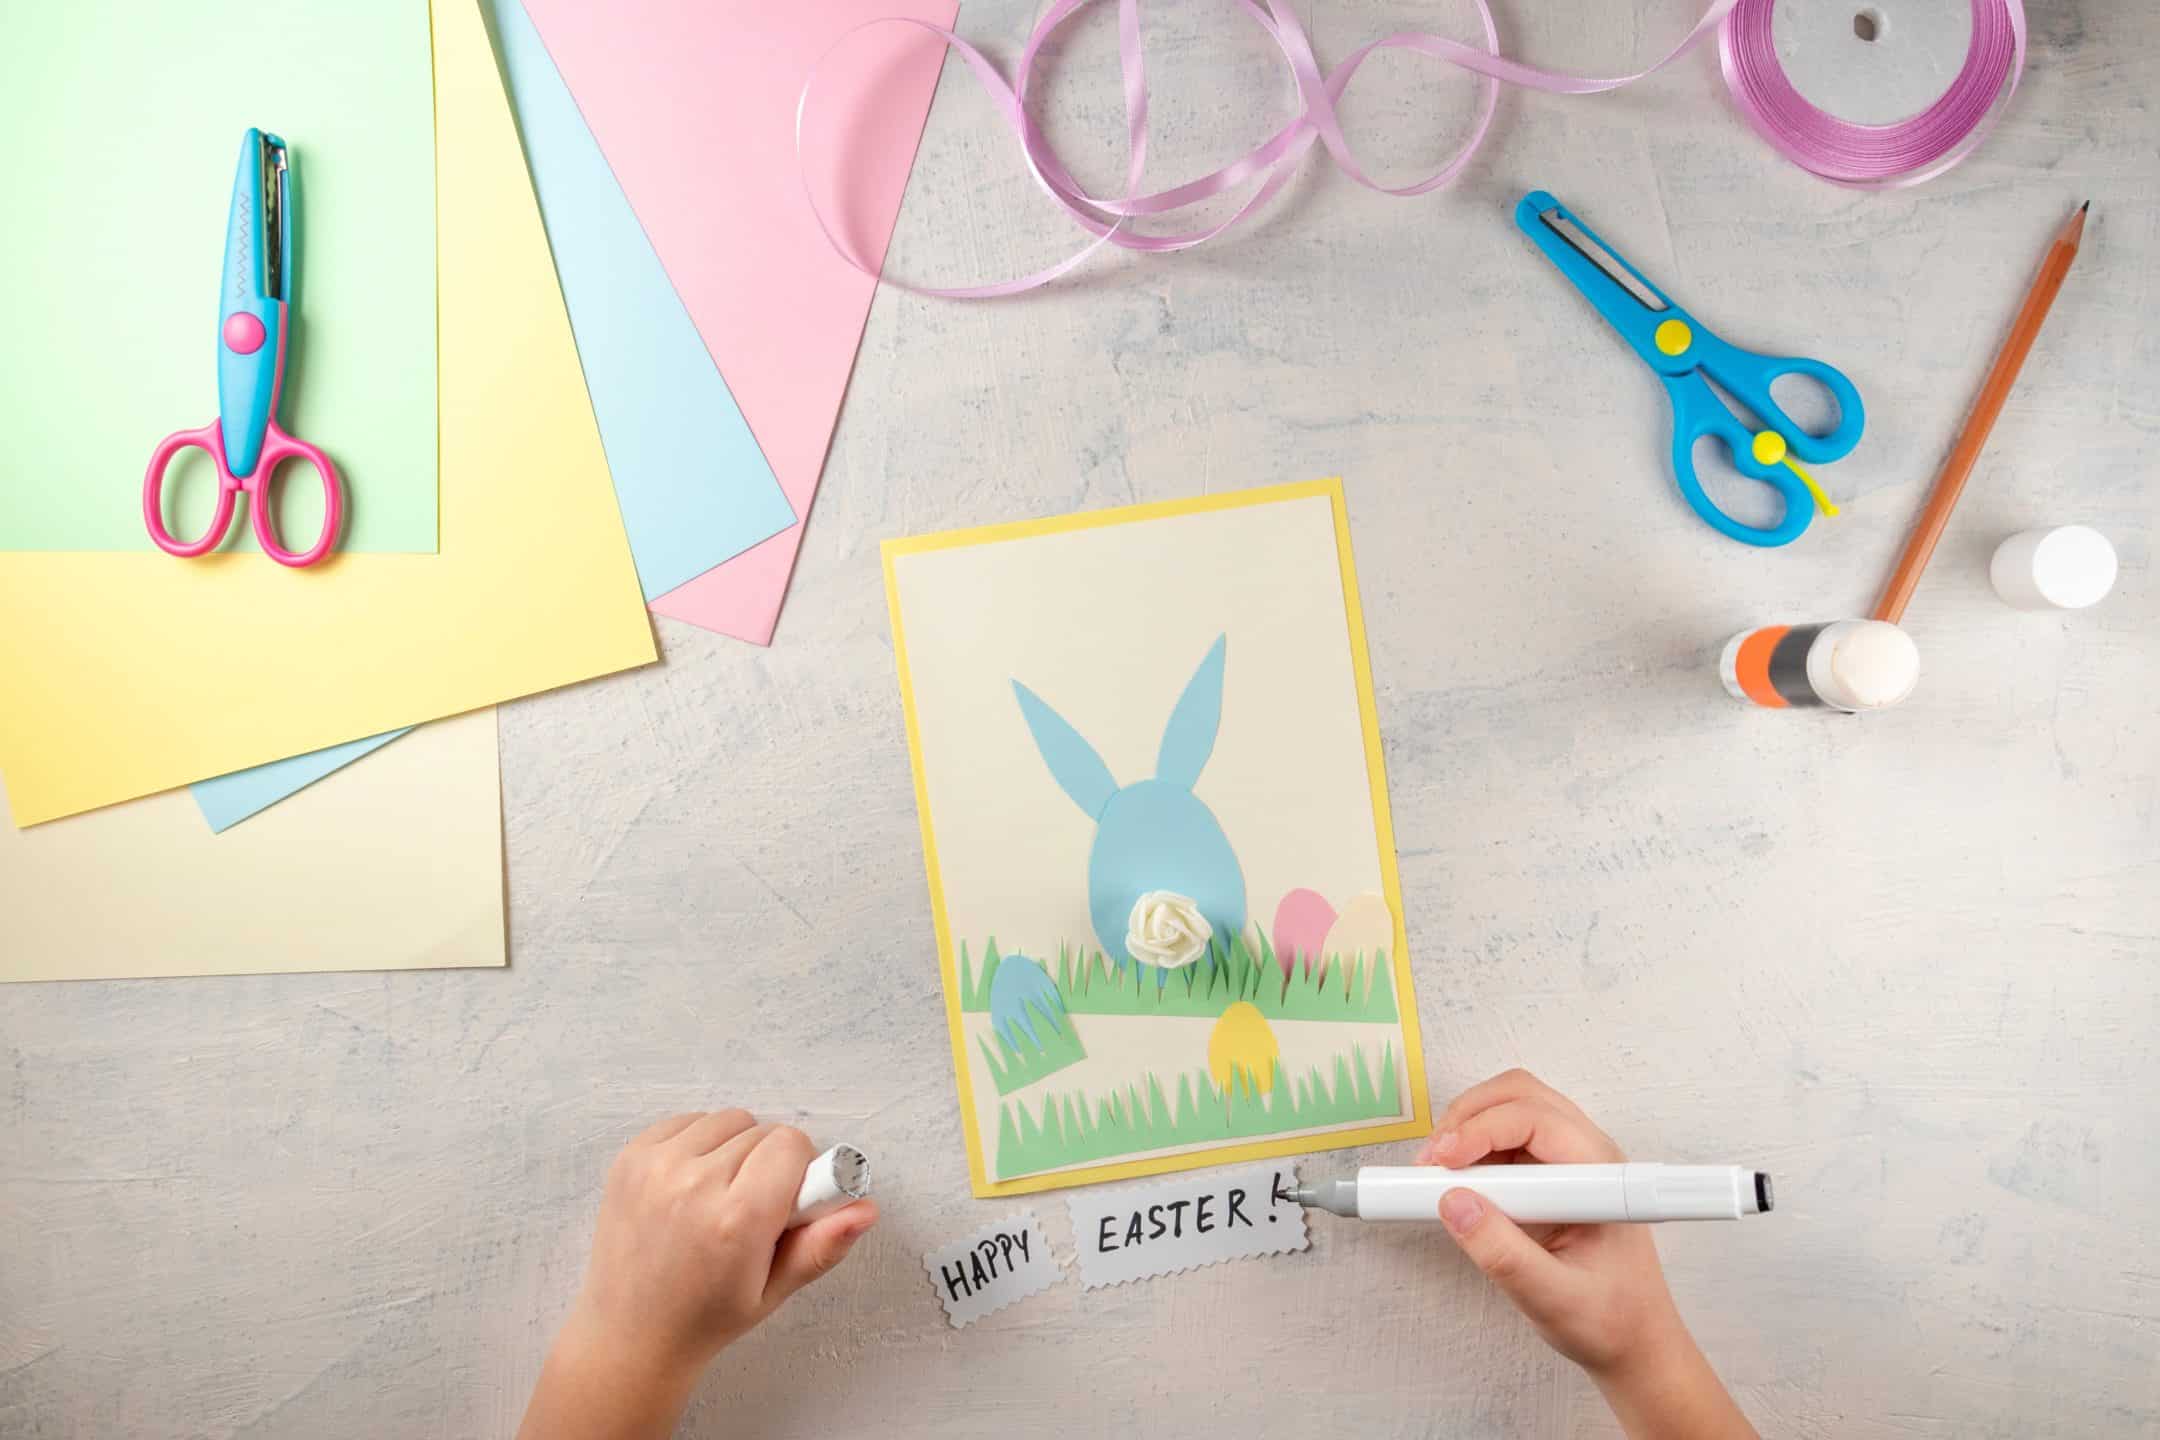 Child drawing, cutting Easter card